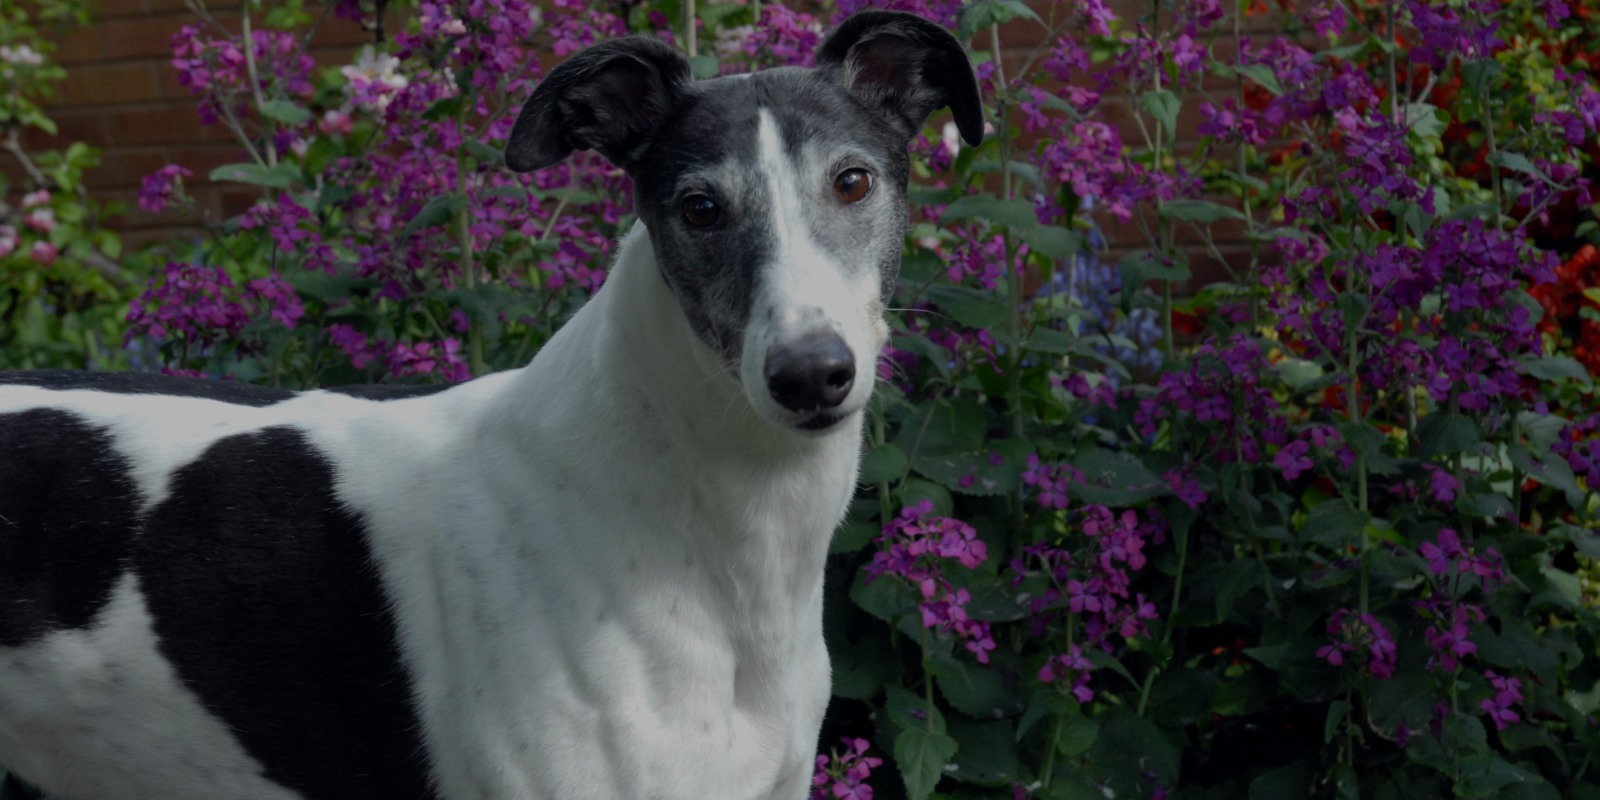 Black & White greyhound in front of purple flowers